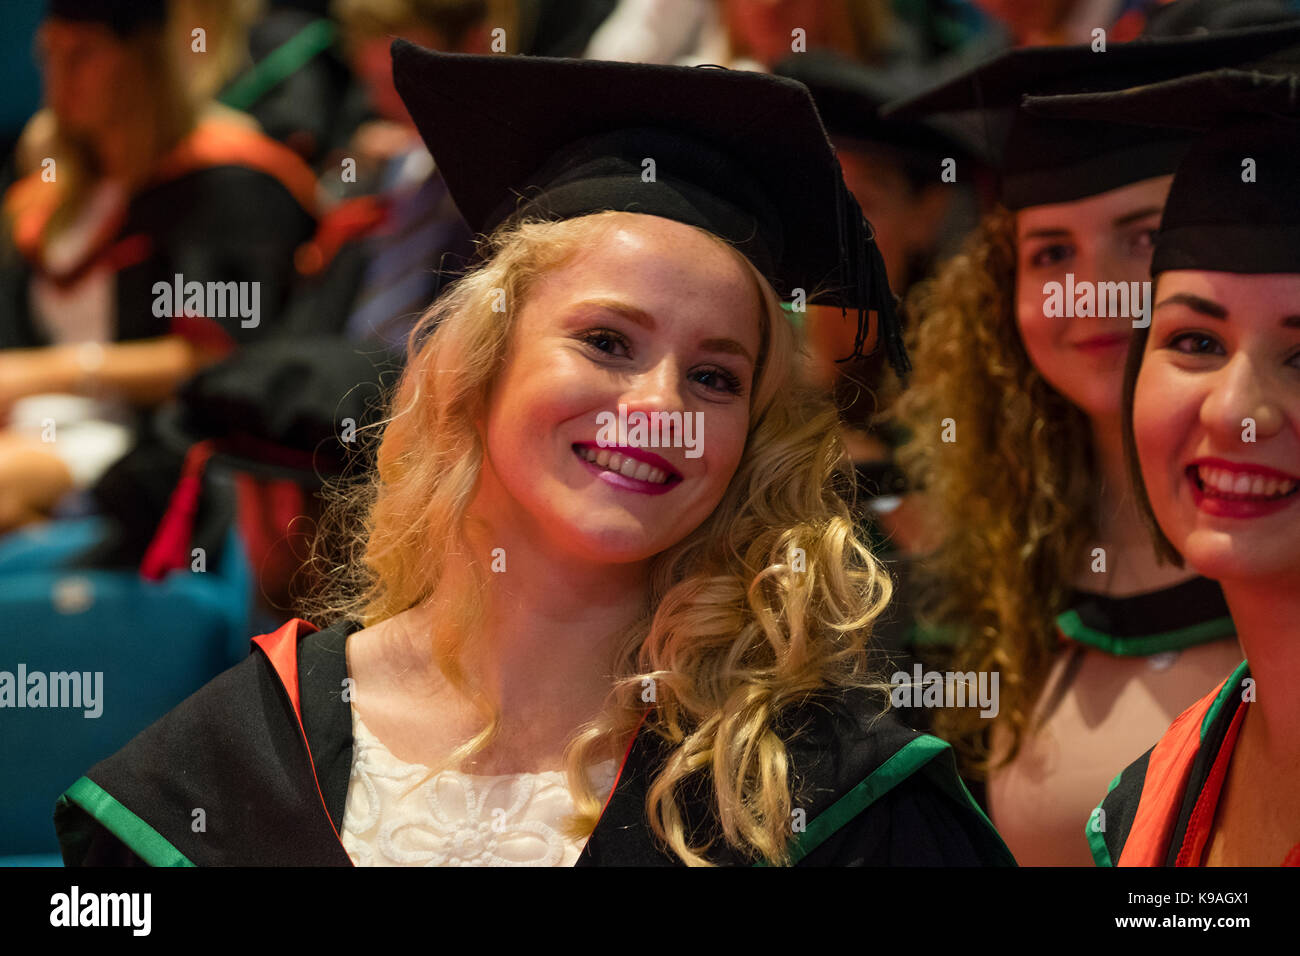 Higher Education in the UK: Aberystwyth University students wearing traditional academic gowns and mortar boards  on their graduation day, July 2017 Stock Photo